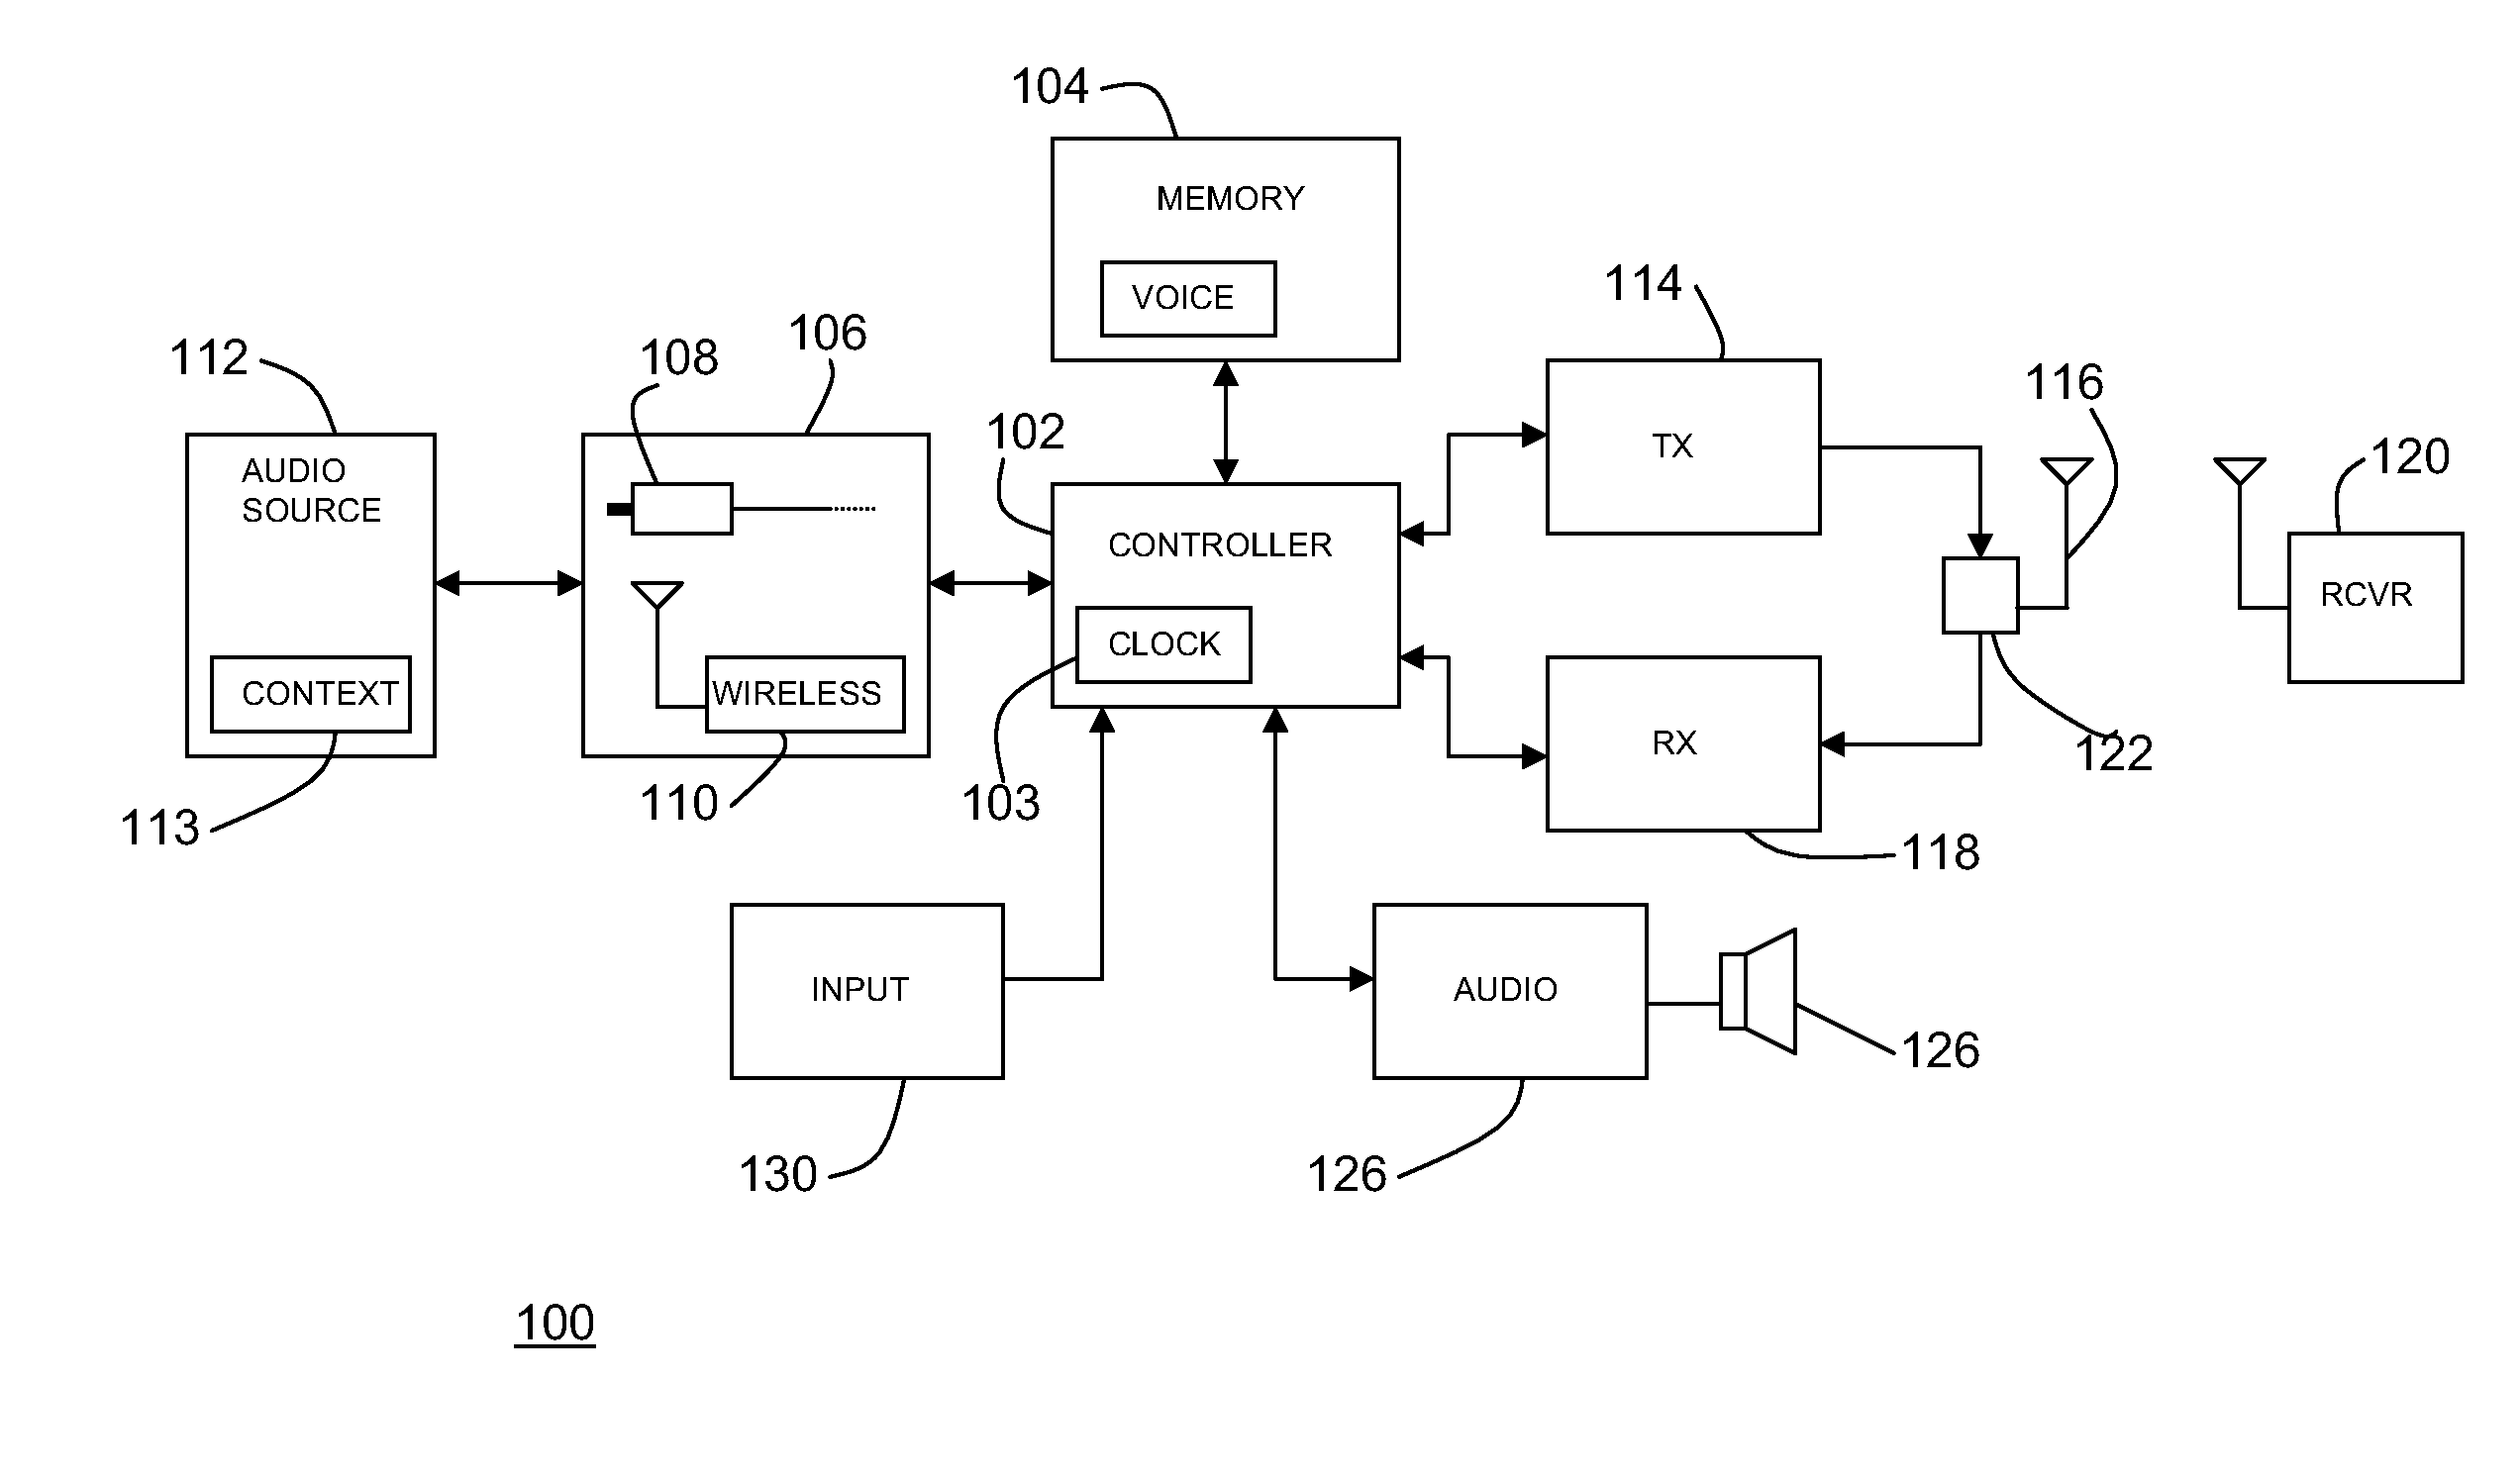 Method and apparatus for selecting a radio channel for transmitting an audio signal to a radio local receiver